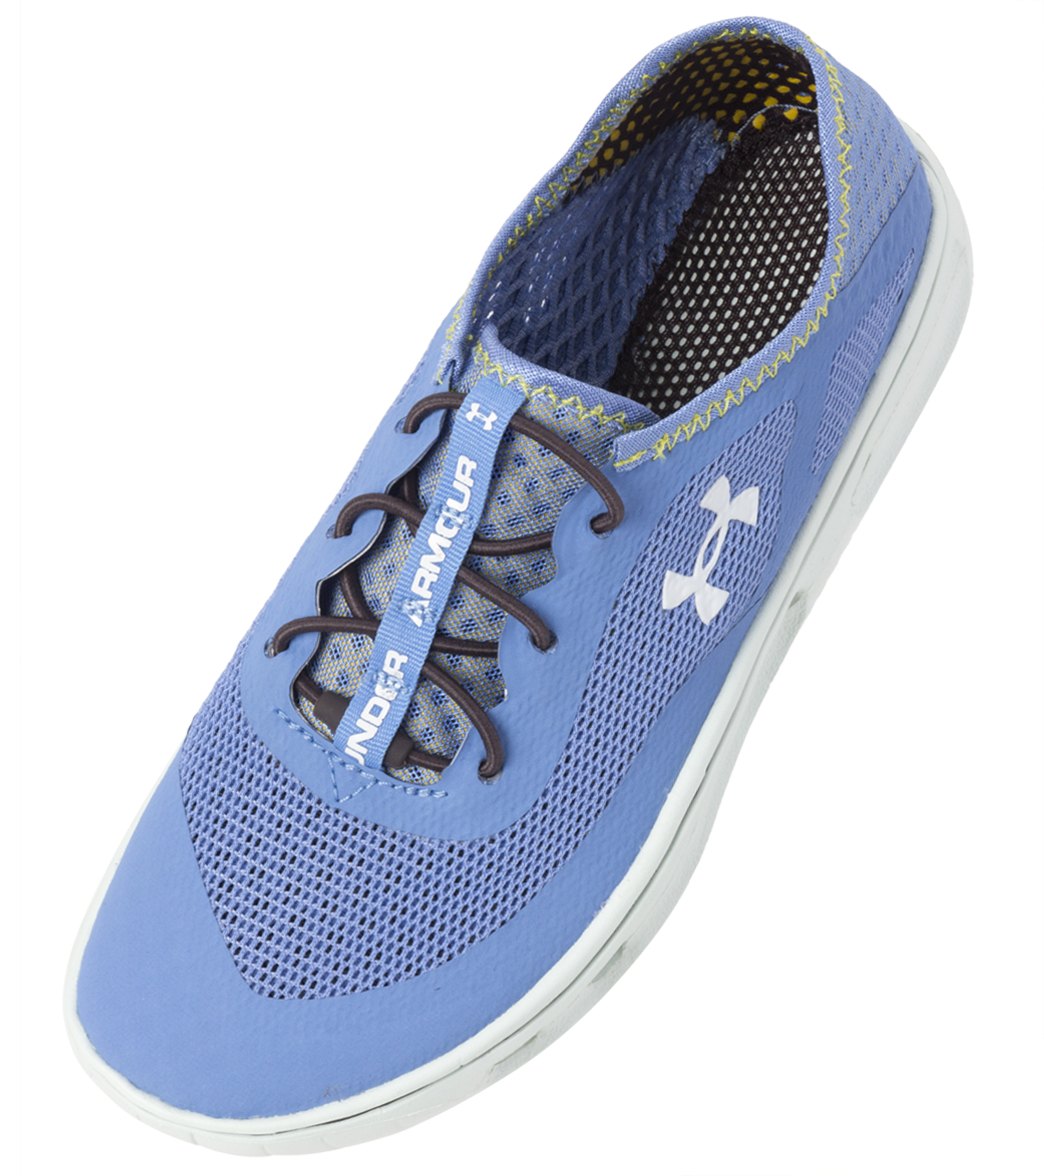 Cheap under armor sneakers womens Buy 